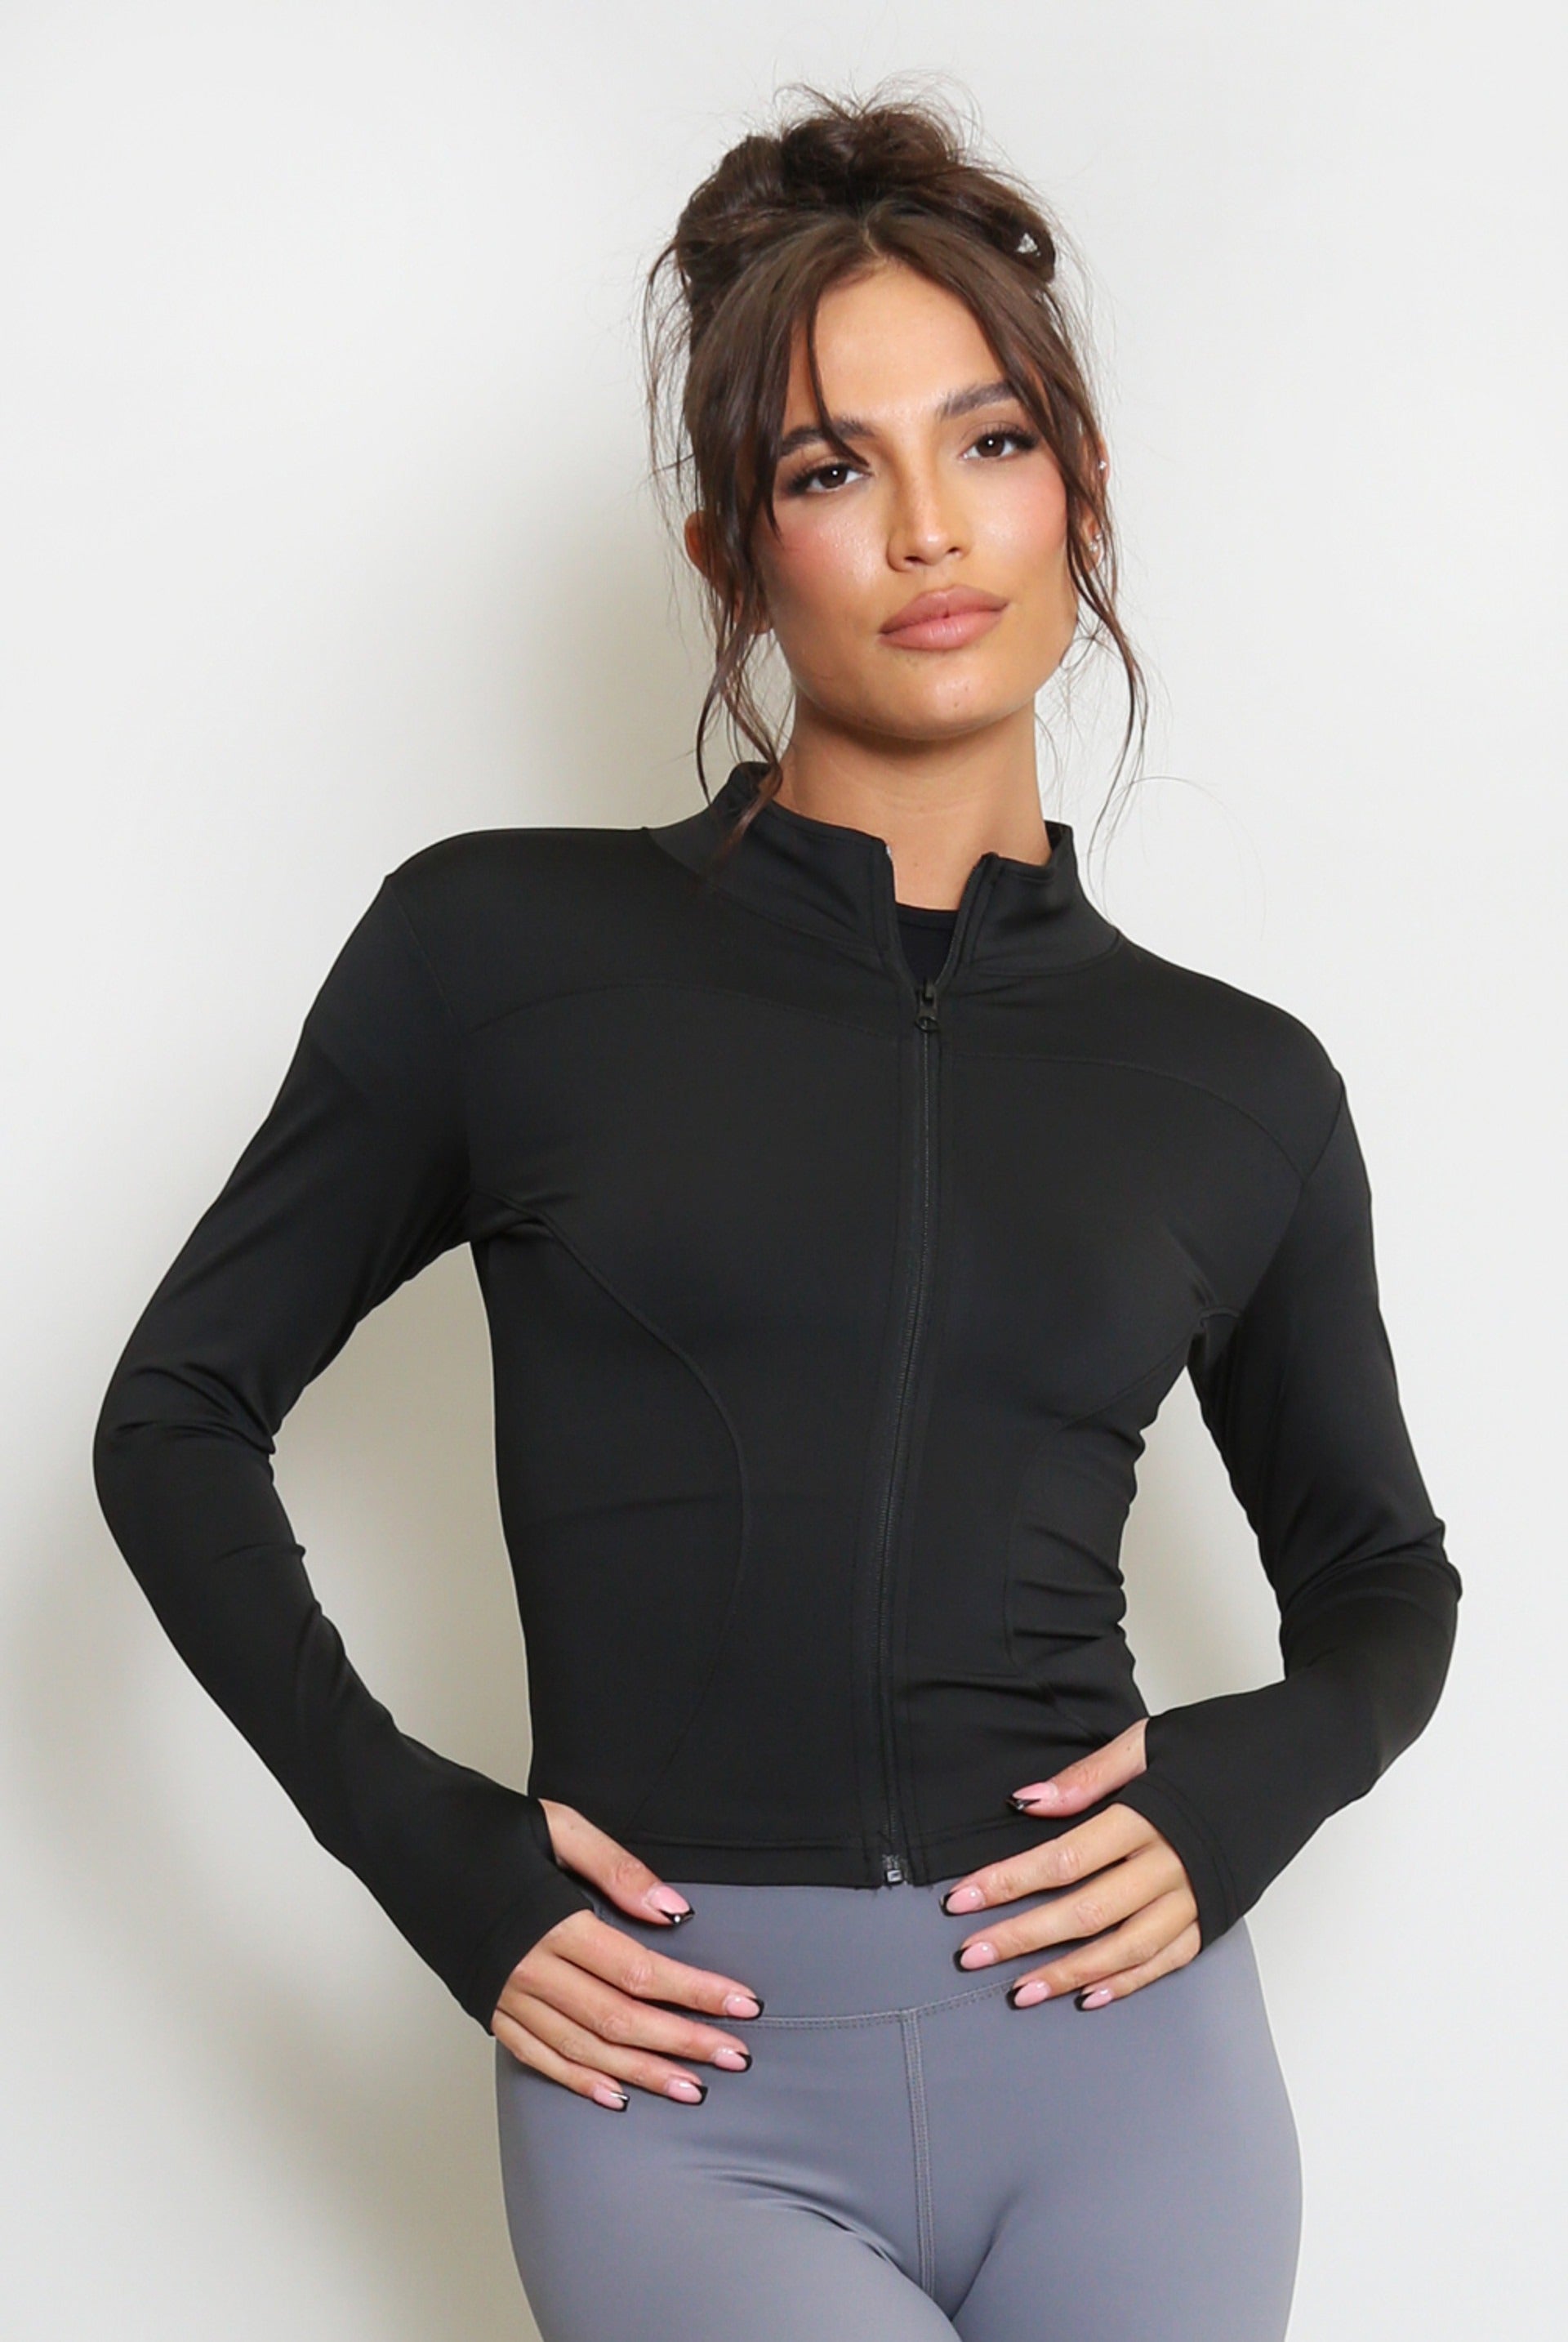 Black Fitted Energy Long Sleeve Gym Top - Mila - Storm Desire